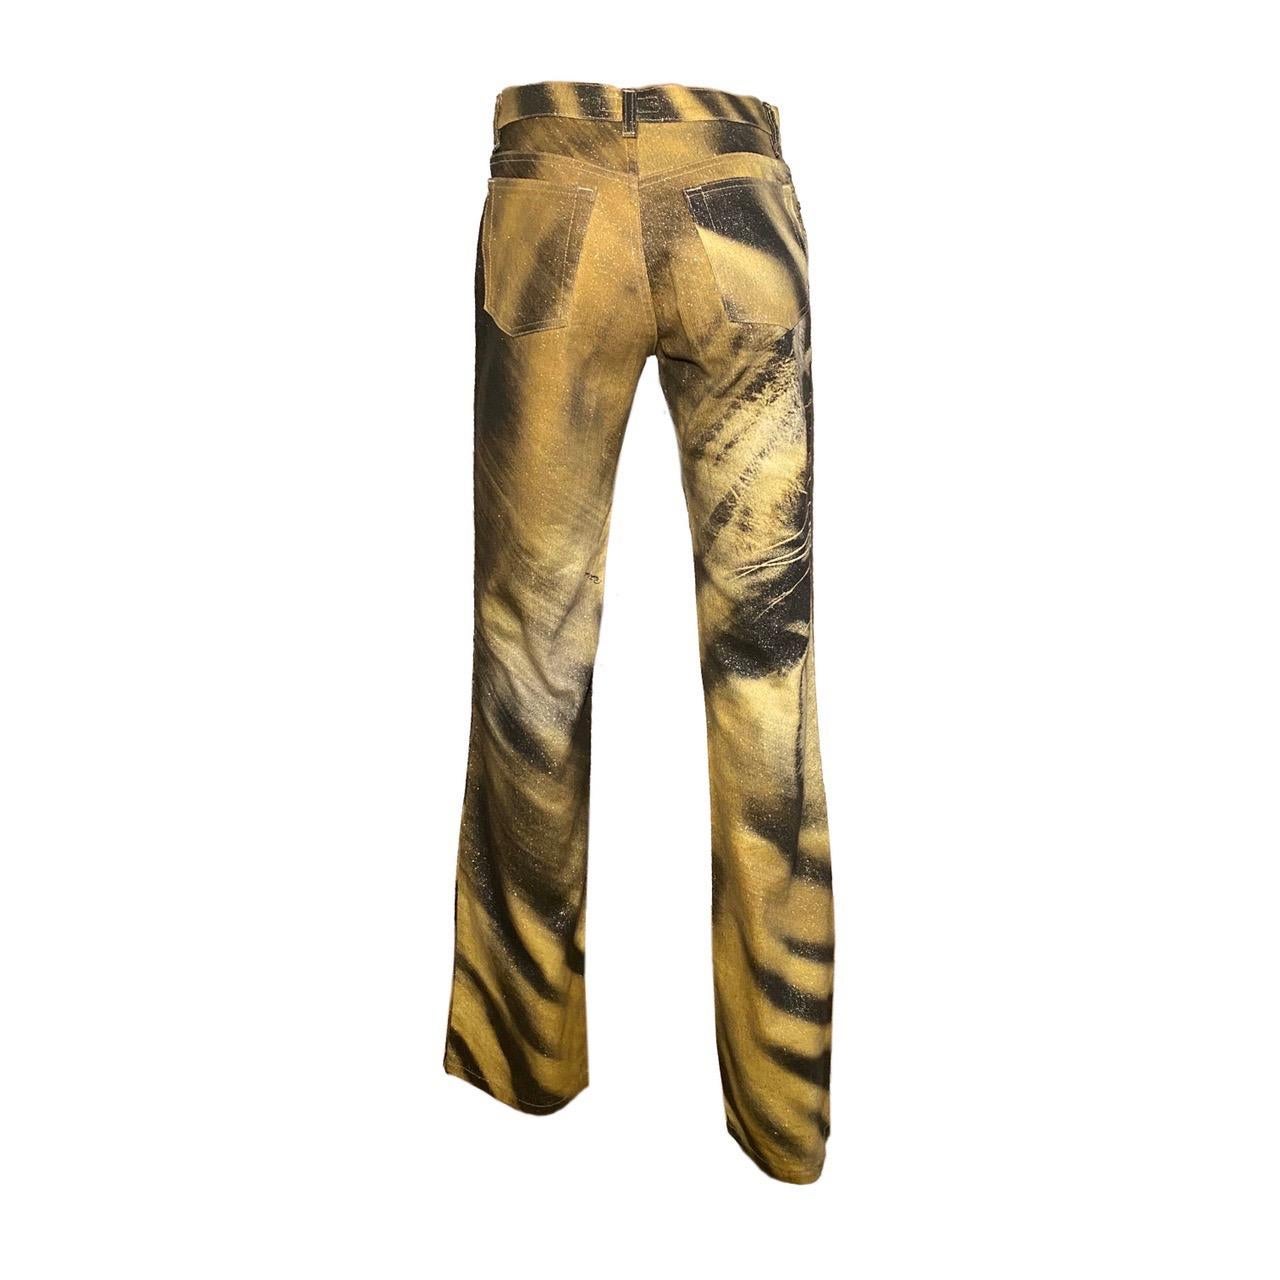 Roberto Cavalli Fall/Winter 2000 Glitter Jeans with iconic tiger print (also seen on runway)

Size S, slightly flared fit